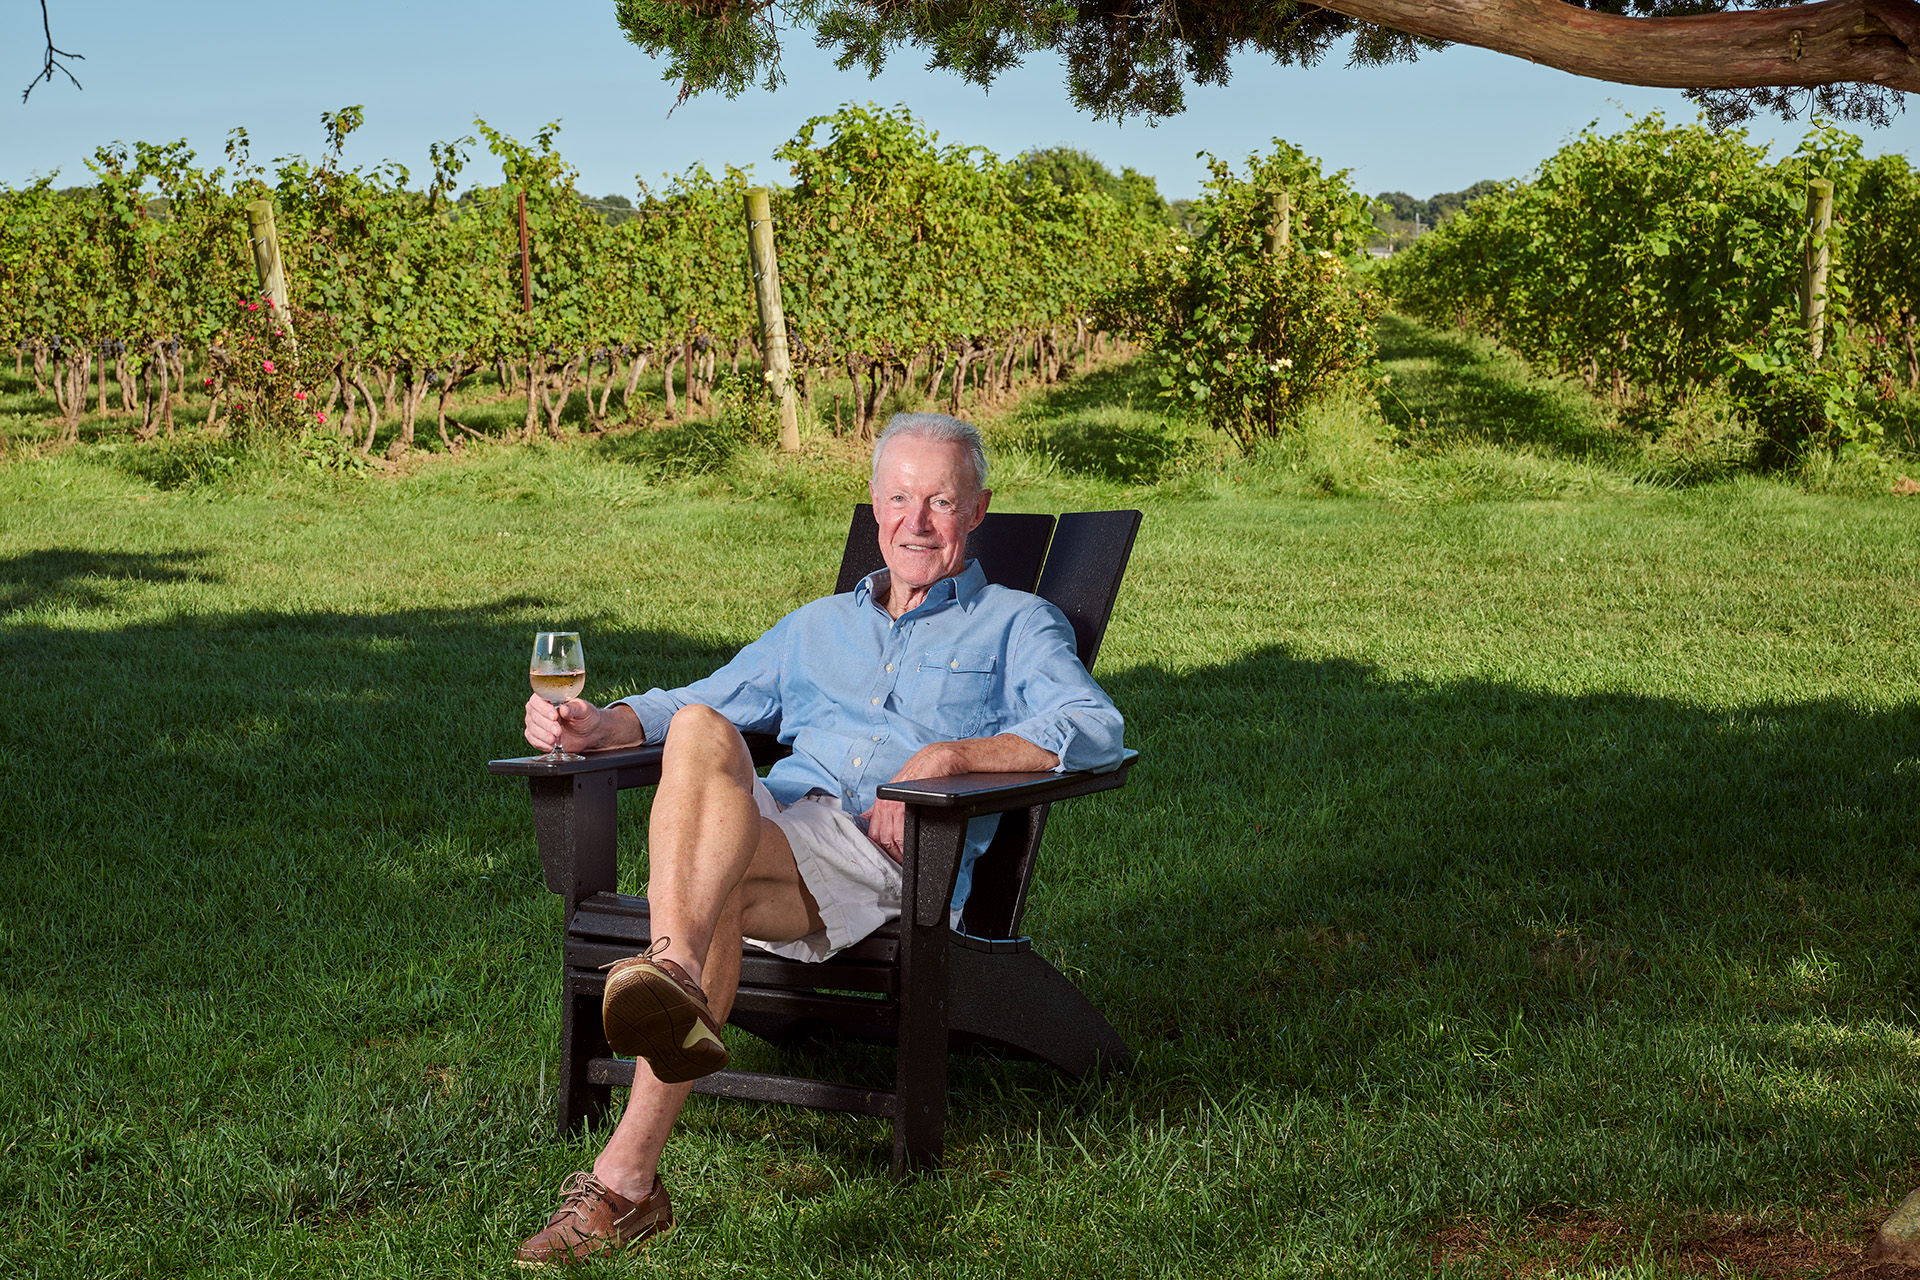 Michael Connery relaxes in his vineyard